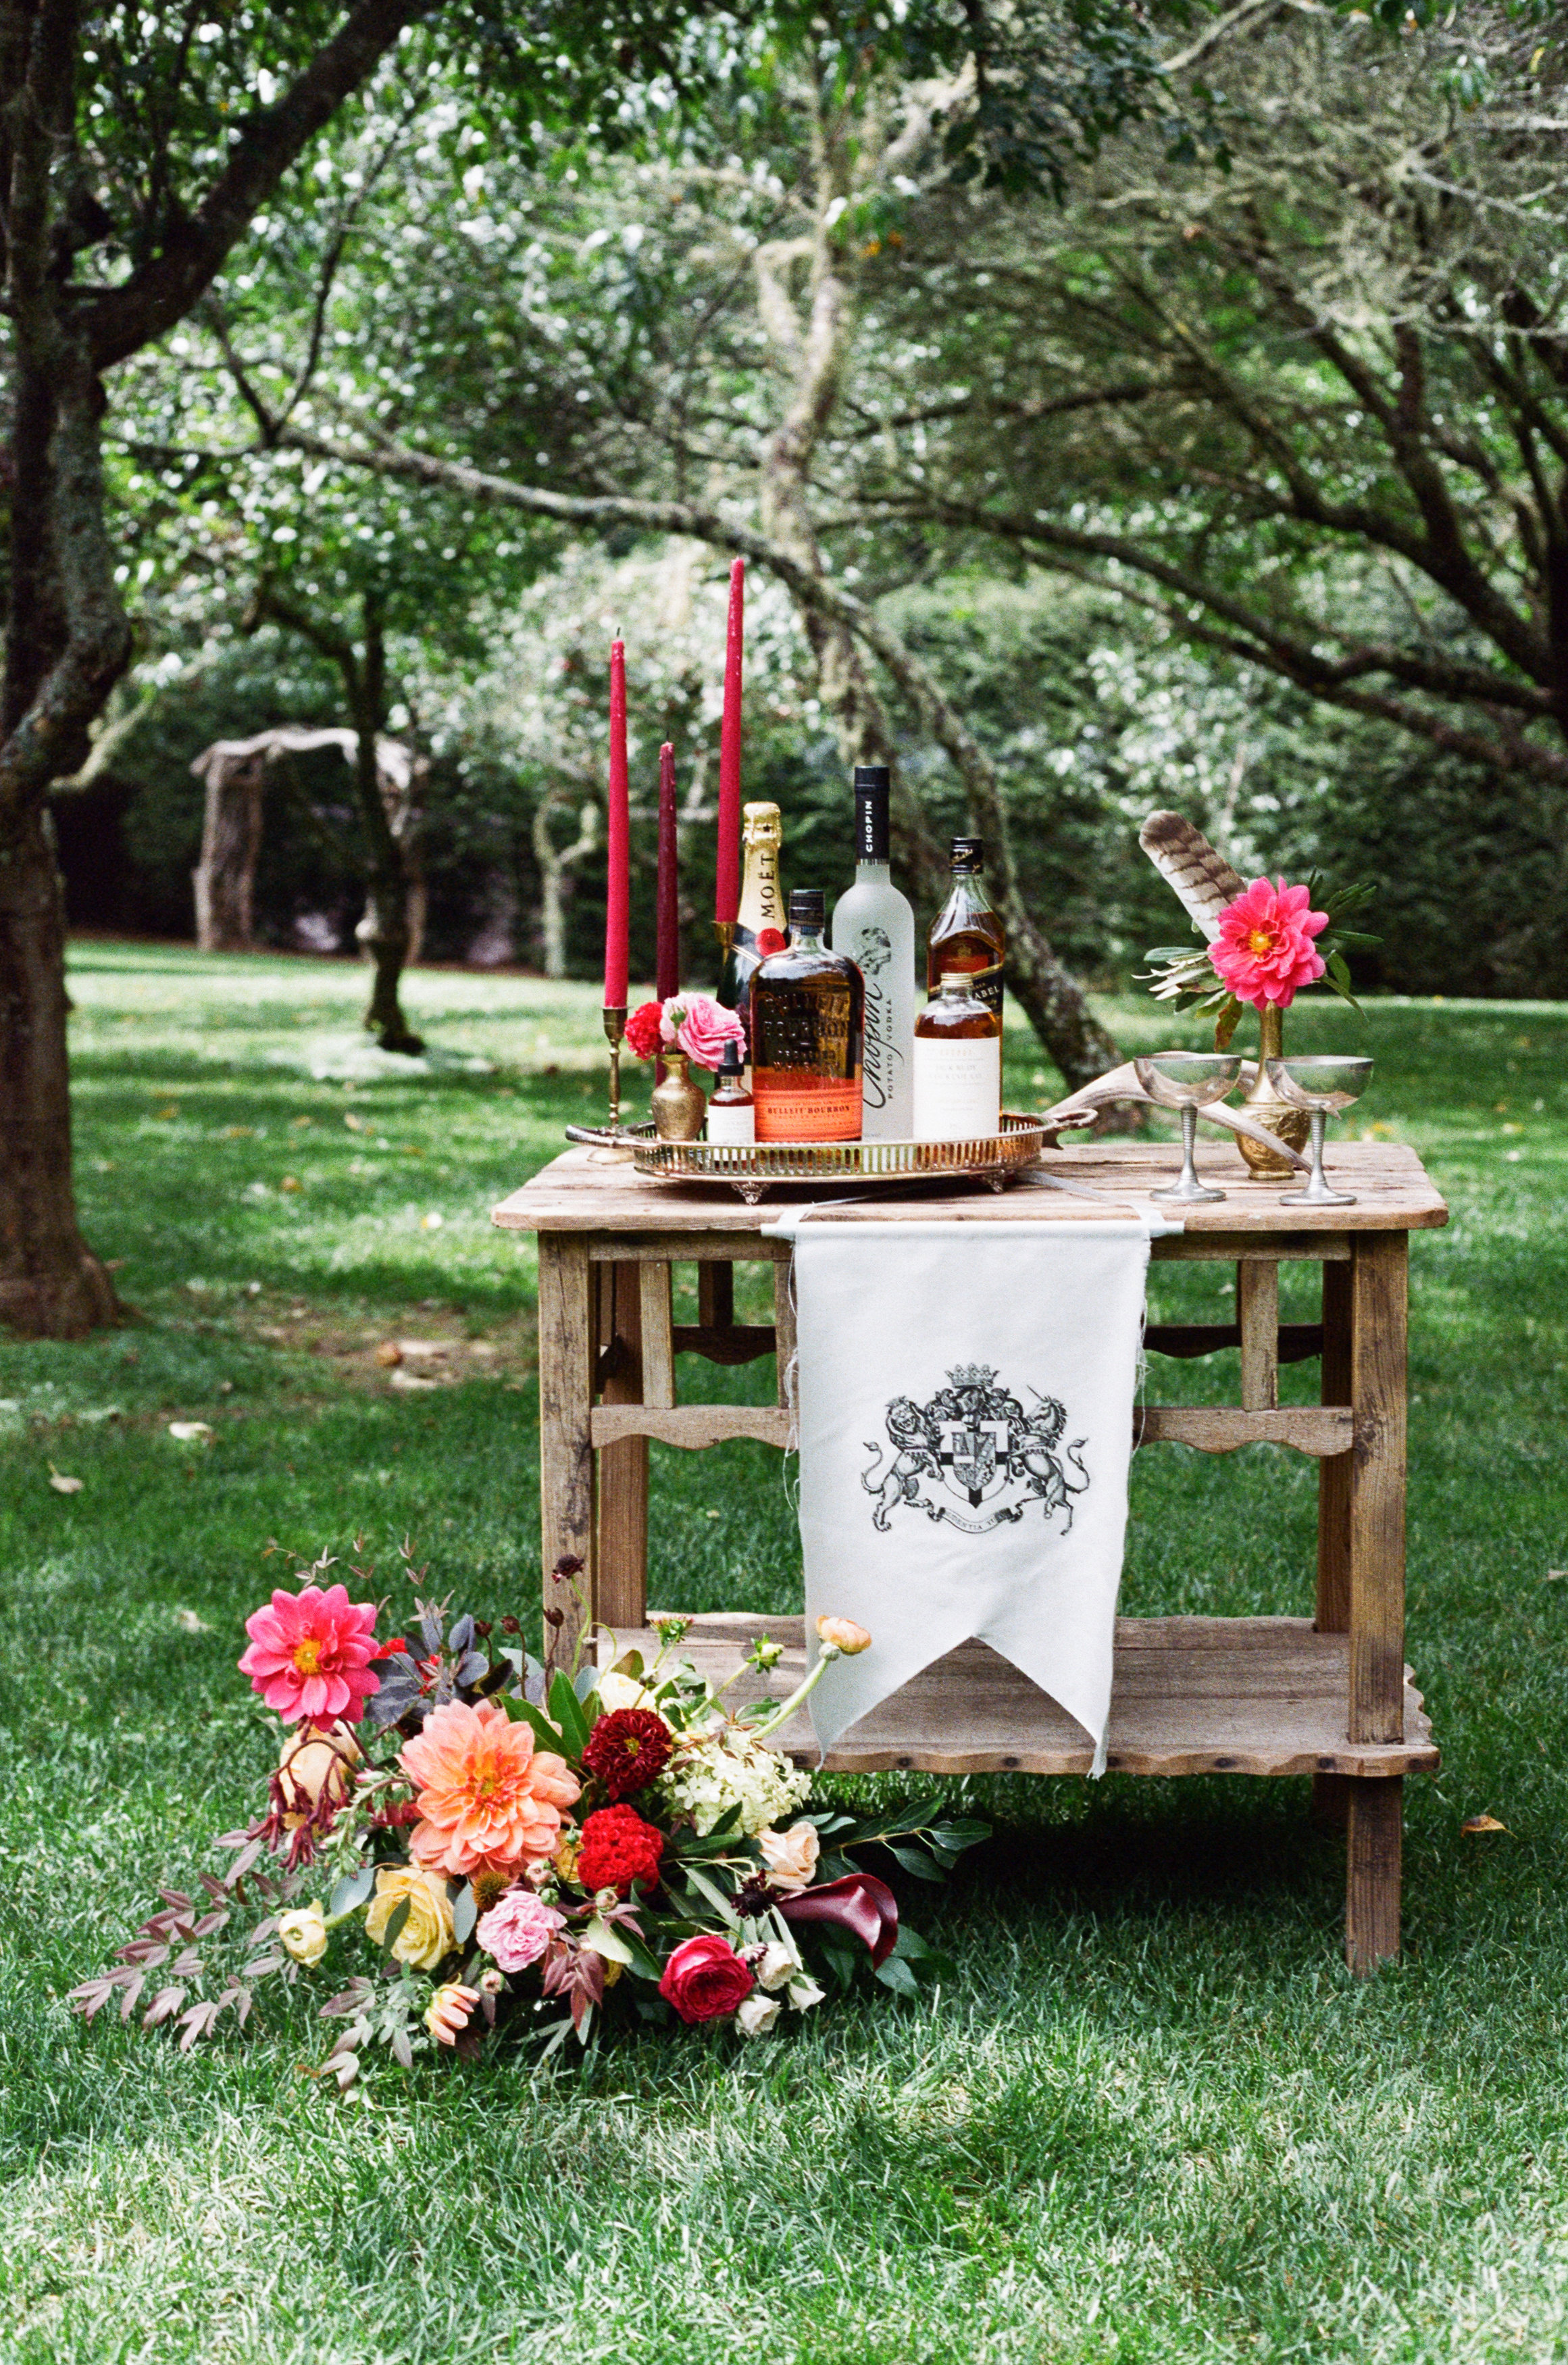  Game of Thrones Editorial Shoot by Whiskey &amp; White Events. At the Old Edwards Inn in Highlands, NC.&nbsp;  Photo by Cameron Reynolds Photography  Design &amp; Styling by Whiskey &amp; White Events  Crest by One and Only Paper  Florals by Floress